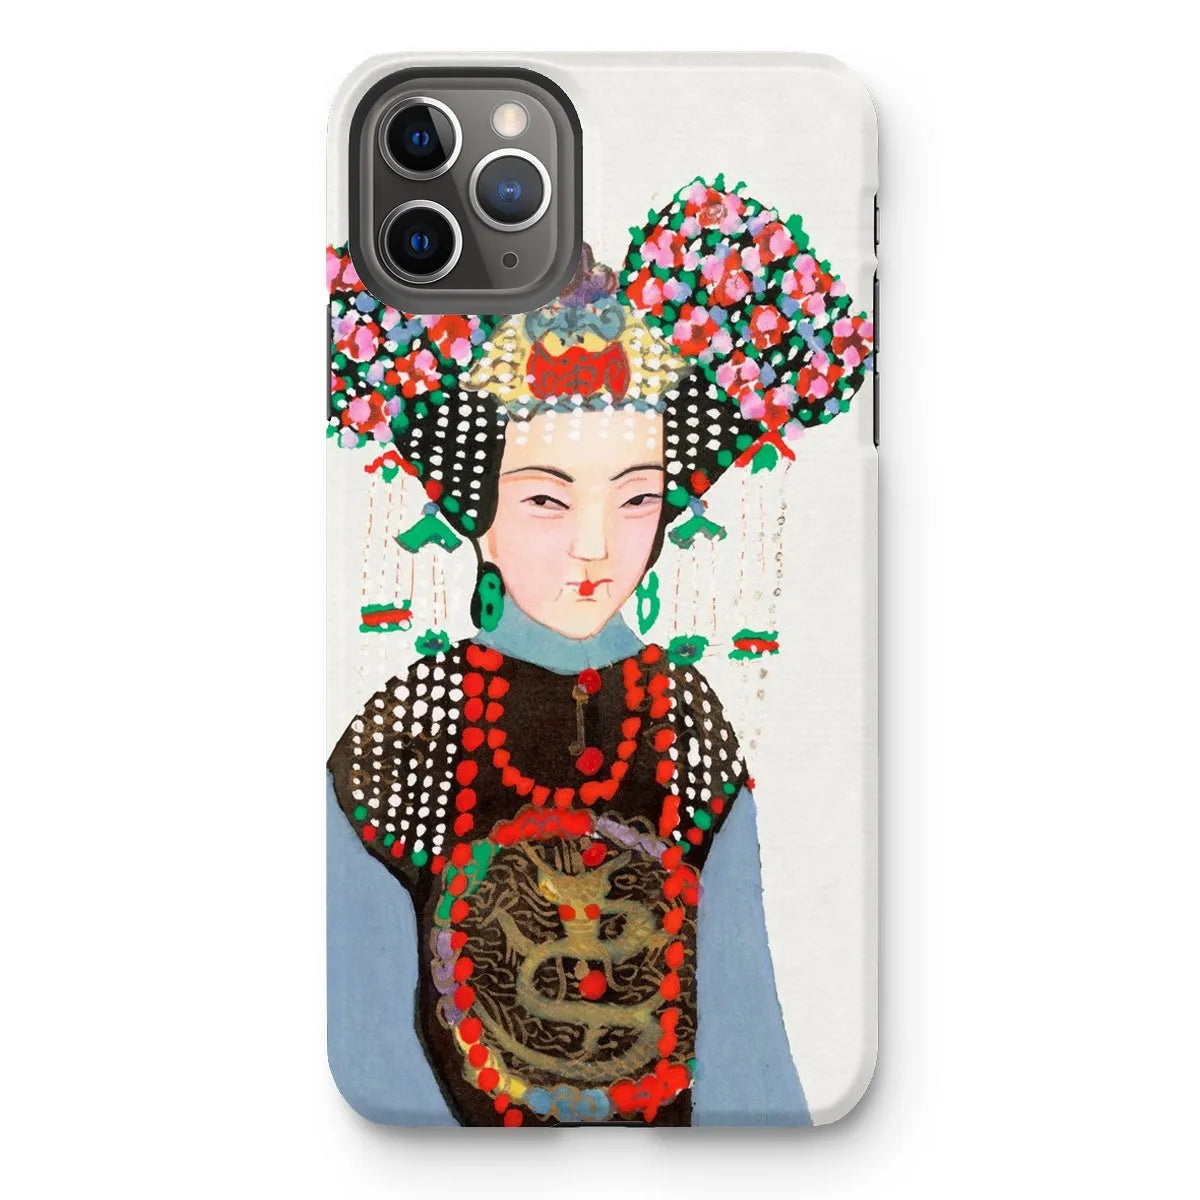 Chinese Empress - Manchu Art Phone Case - Iphone 11 Pro Max / Matte - Mobile Phone Cases - Aesthetic Art